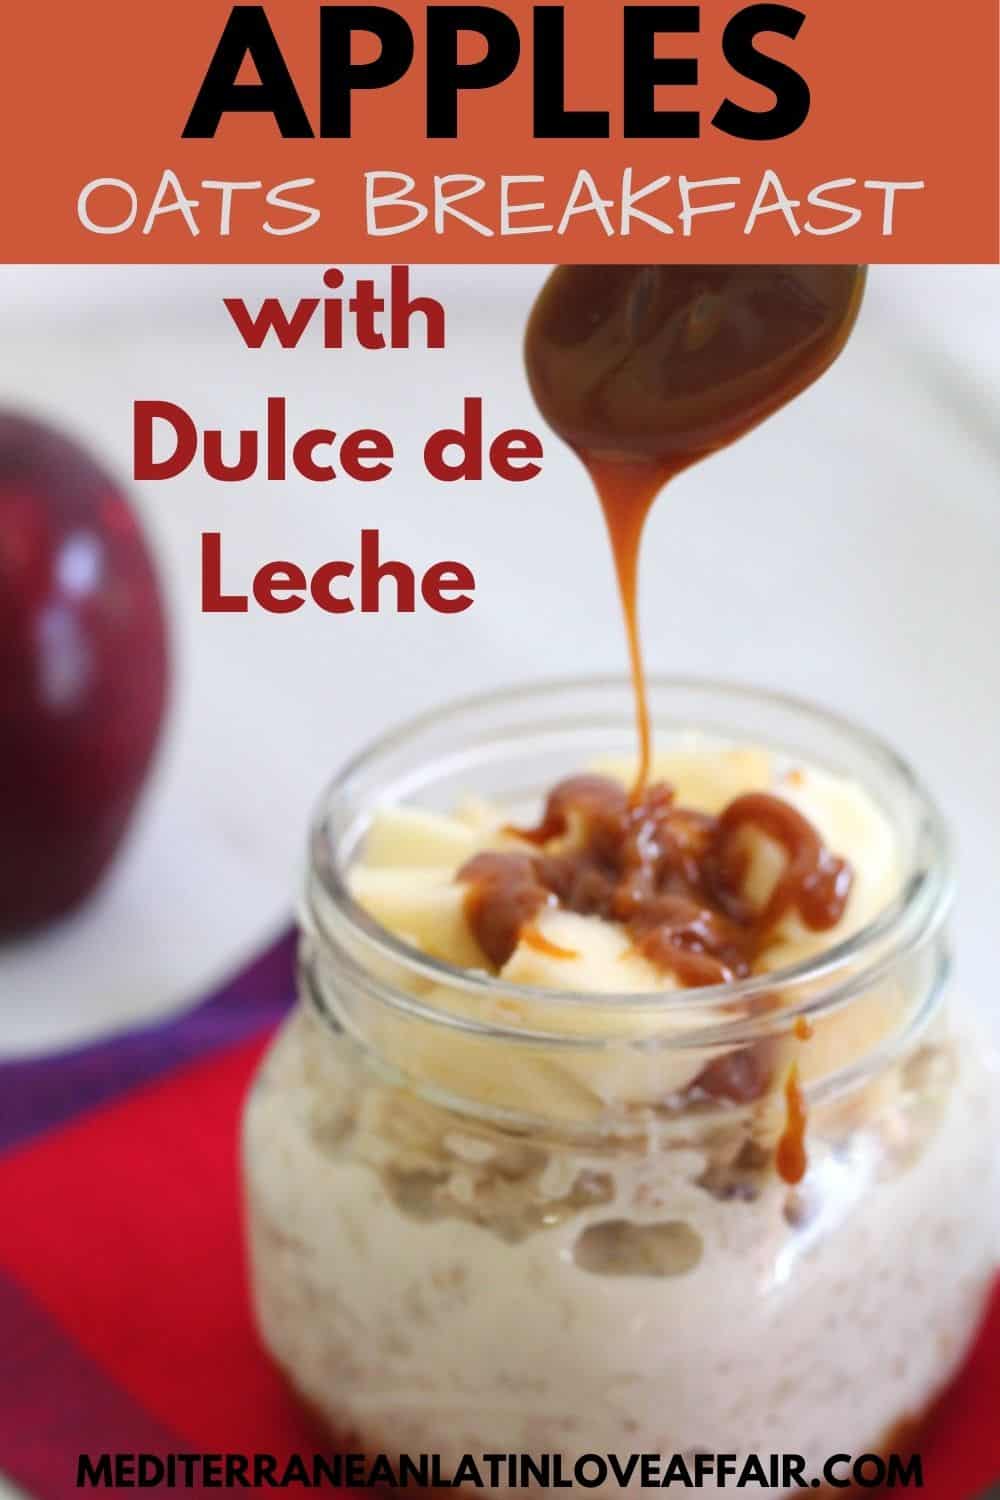 An image prepared for Pinterest. It shows a jar of breakfast oats, topped with chopped apples and drizzled with dulce de leche (caramel). The image has a title bar and a link to the website in the bottom.